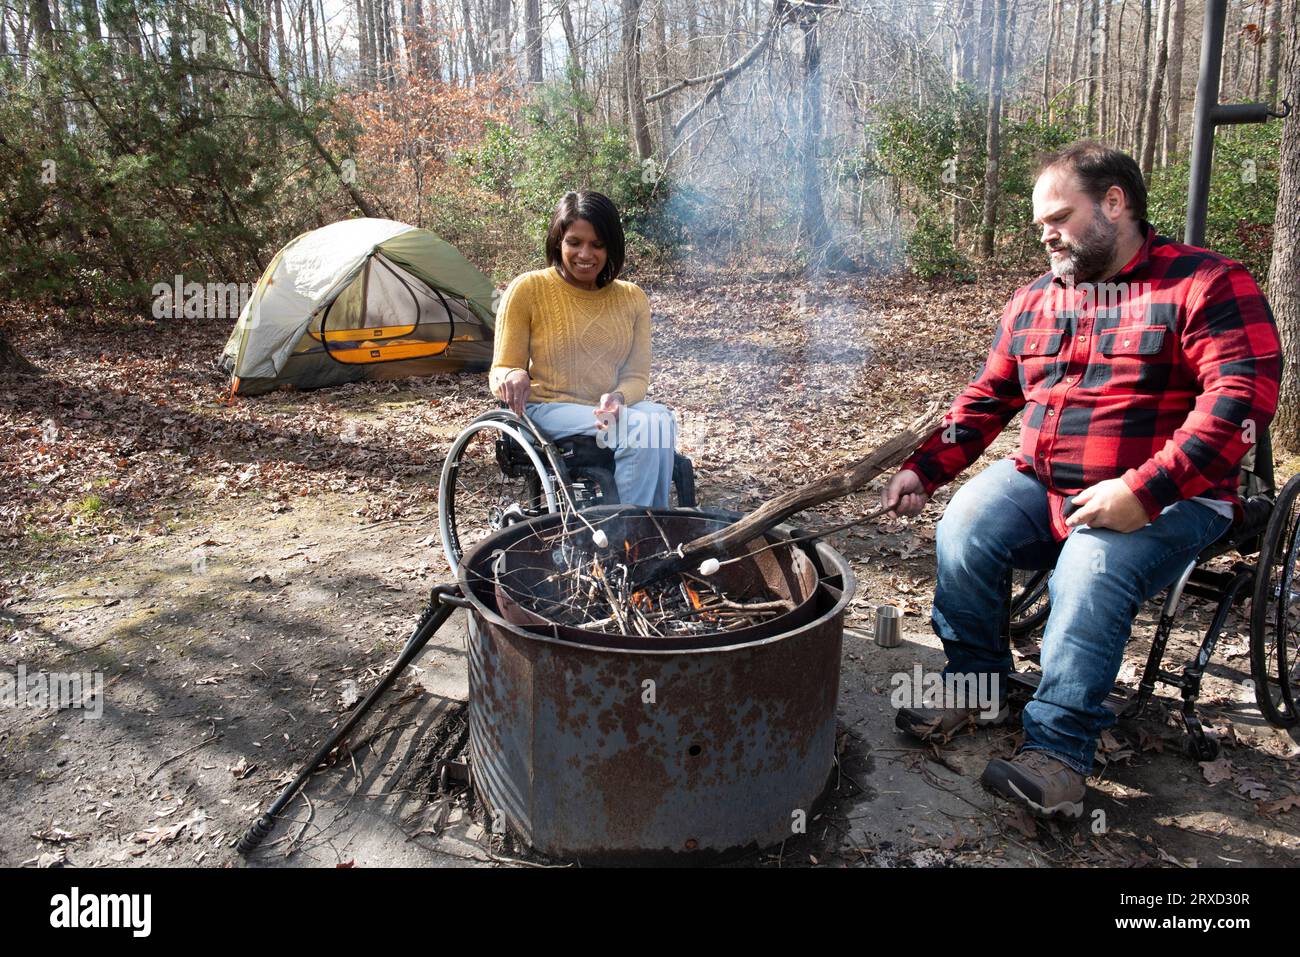 Roasting s'mores over a campfire is fun for all ages. Stock Photo